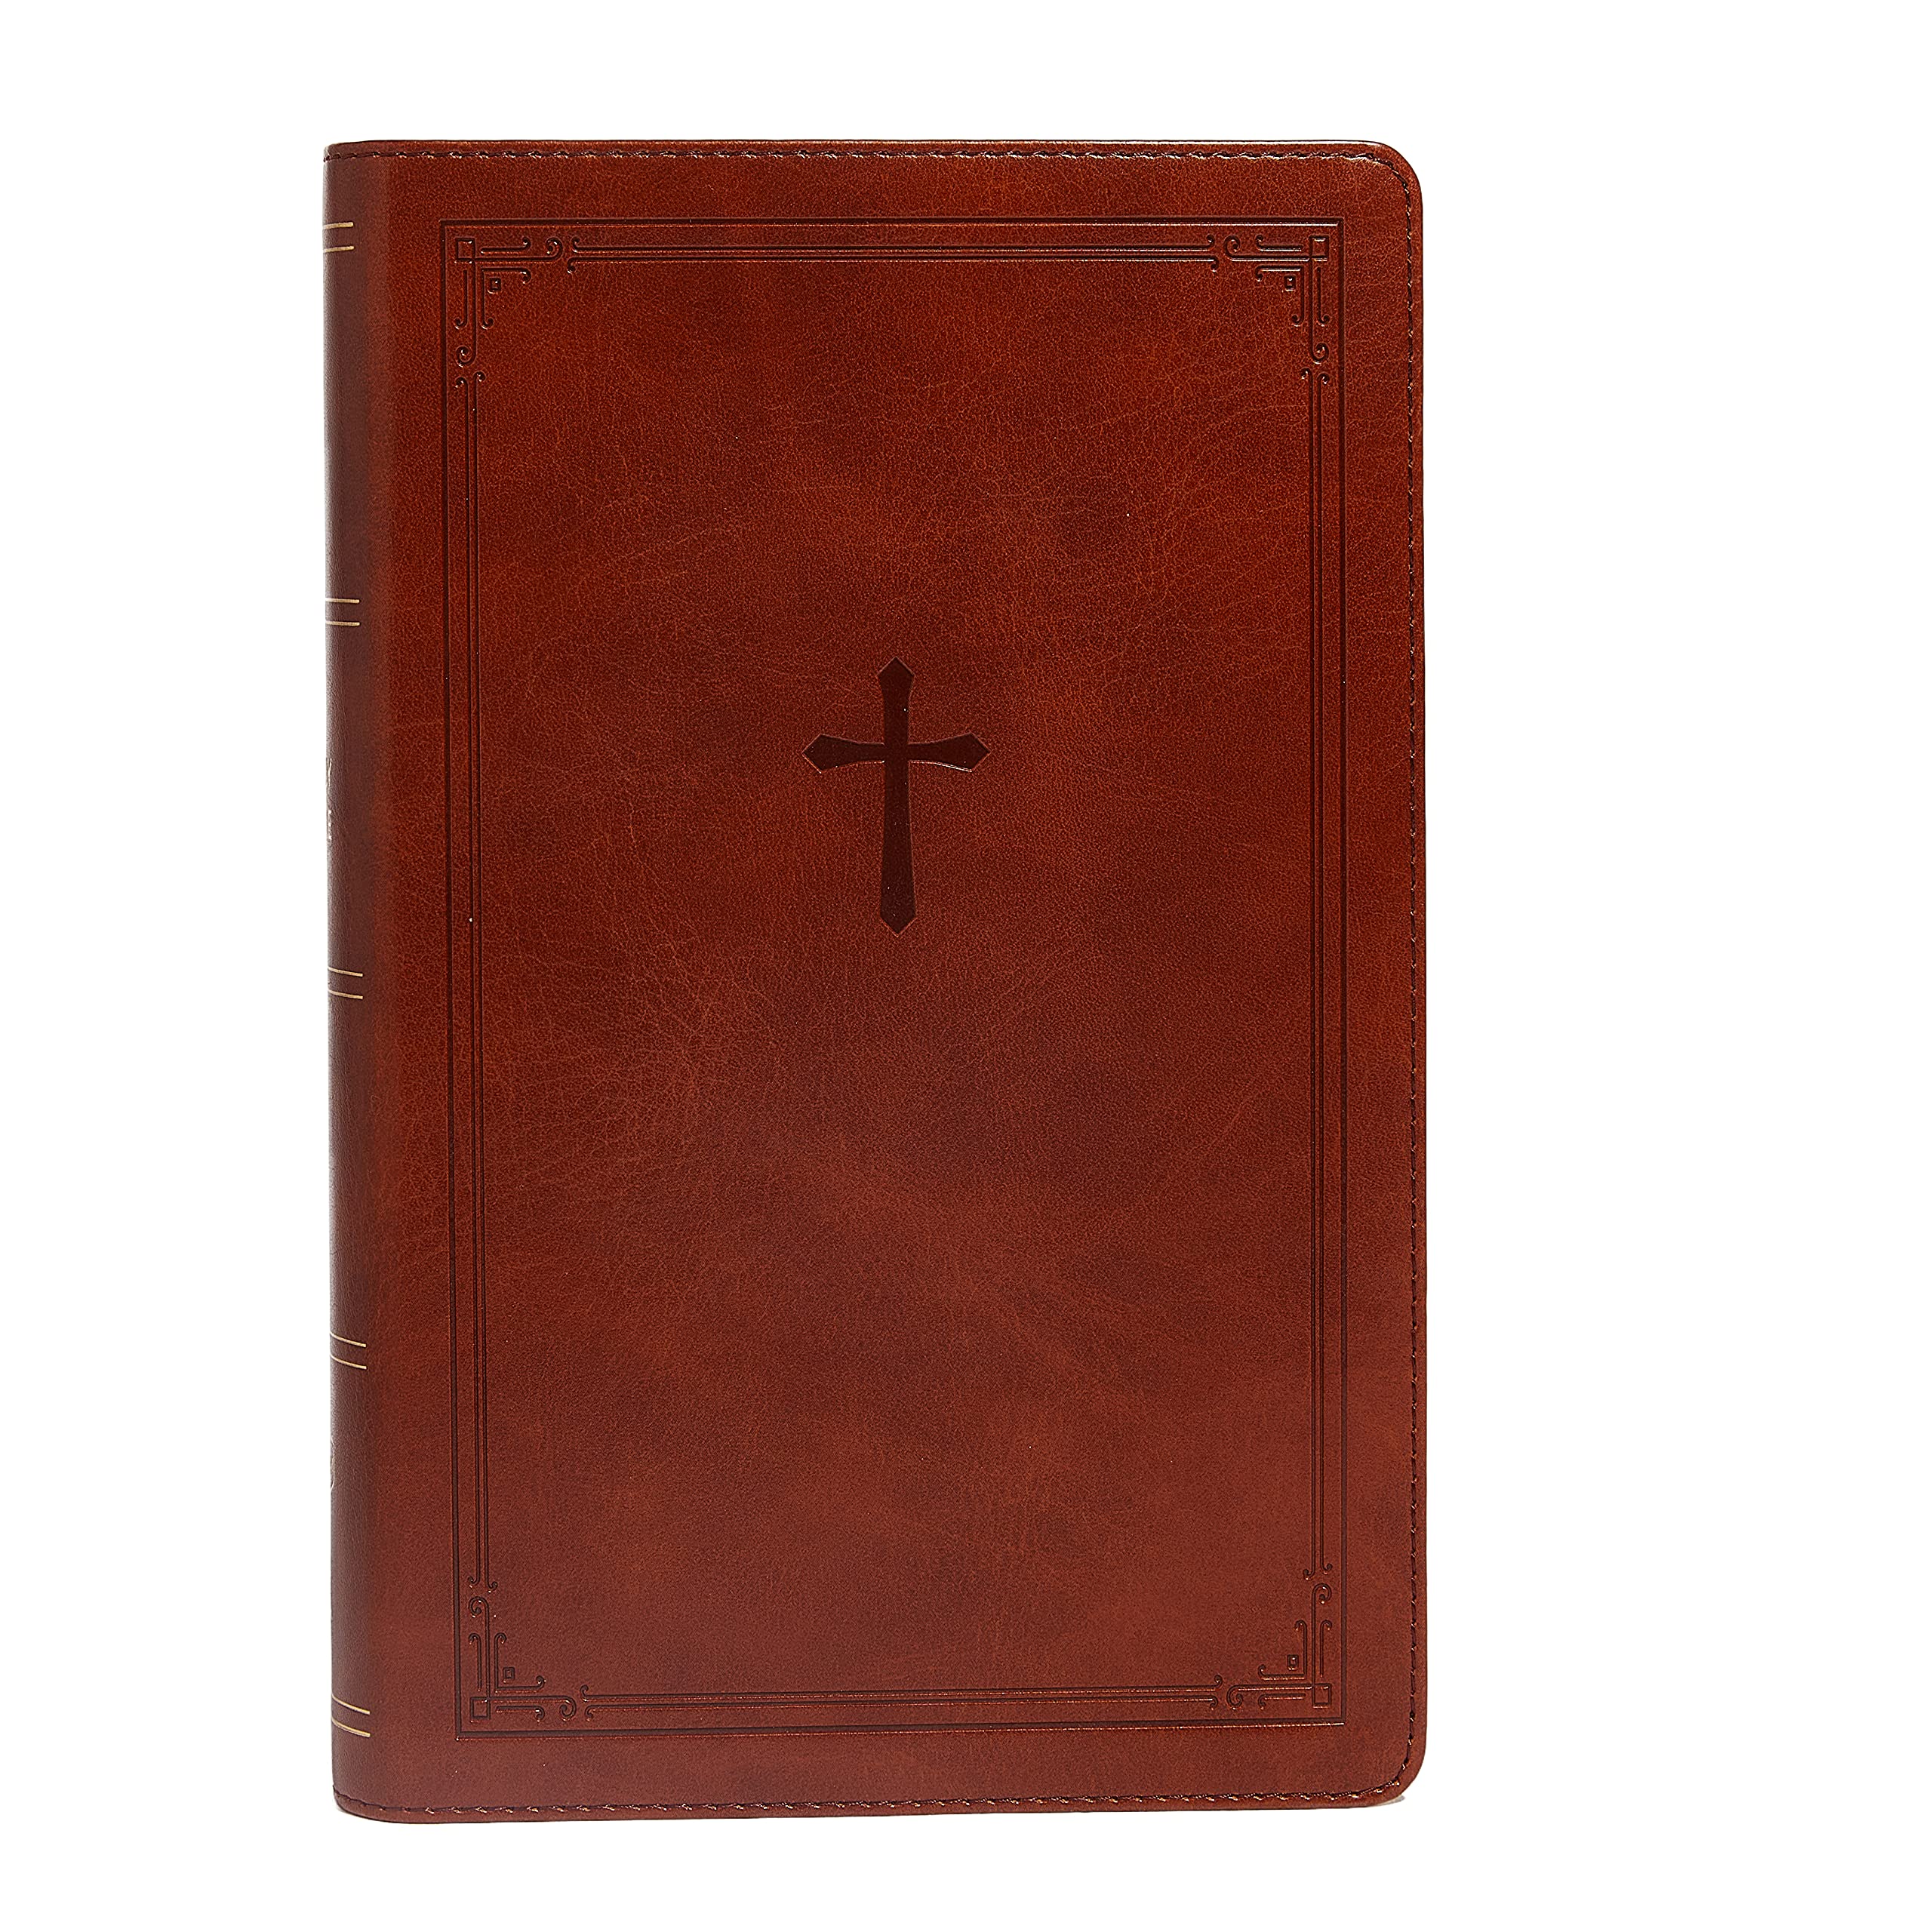 NKJV, End-of-Verse Reference Bible, Personal Size Large Print, Leathersoft, Brown, Red Letter, Comfort Print: Holy Bible, New King James Version